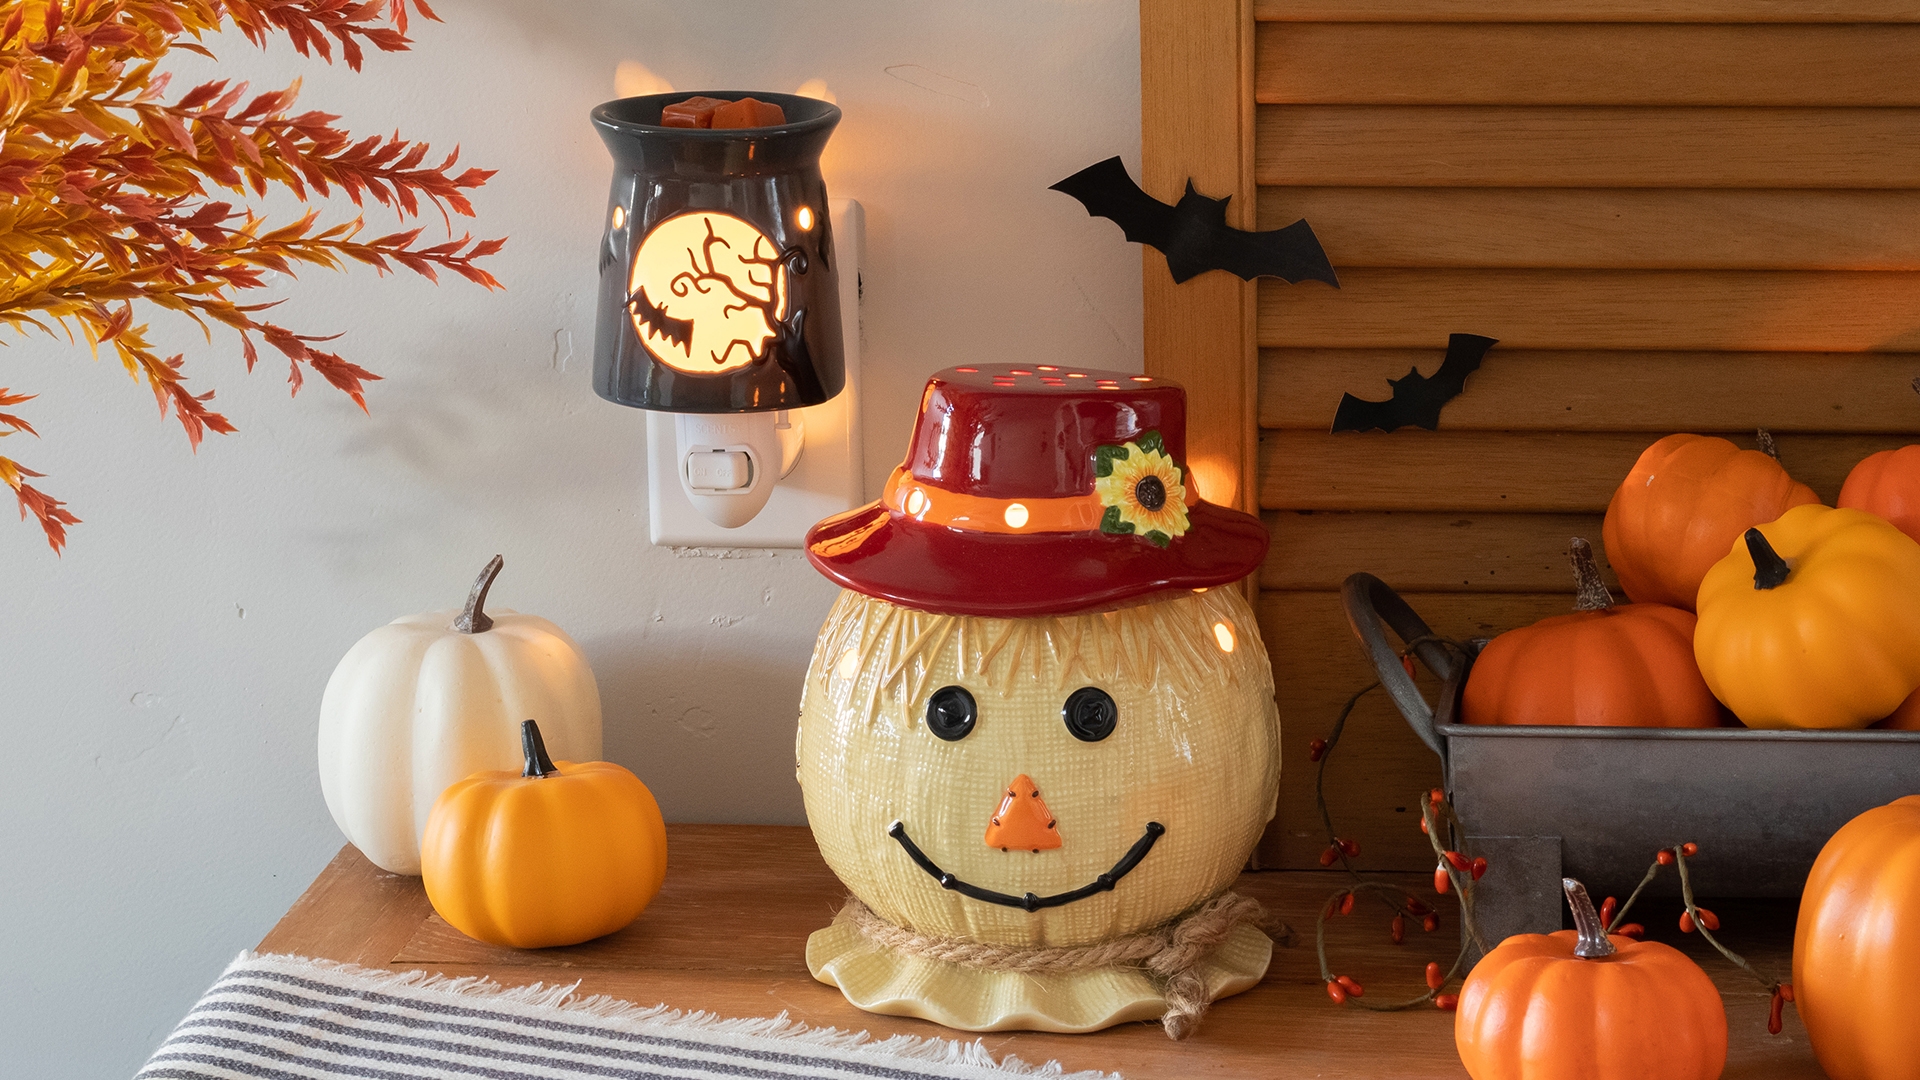 Scentsy harvest favorites collection is coming